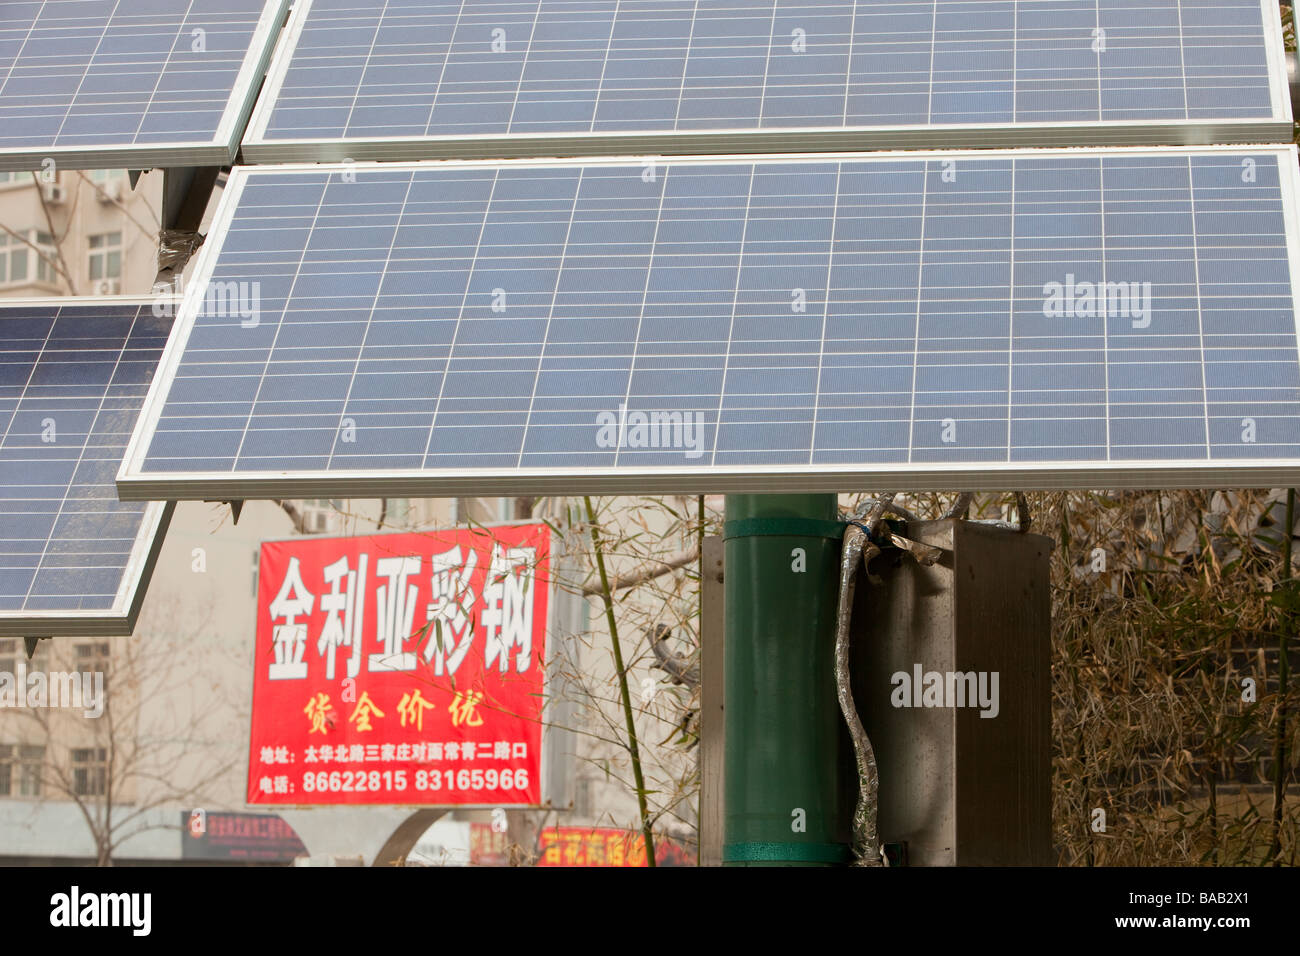 Solar electric generation in Xian city in China Stock Photo